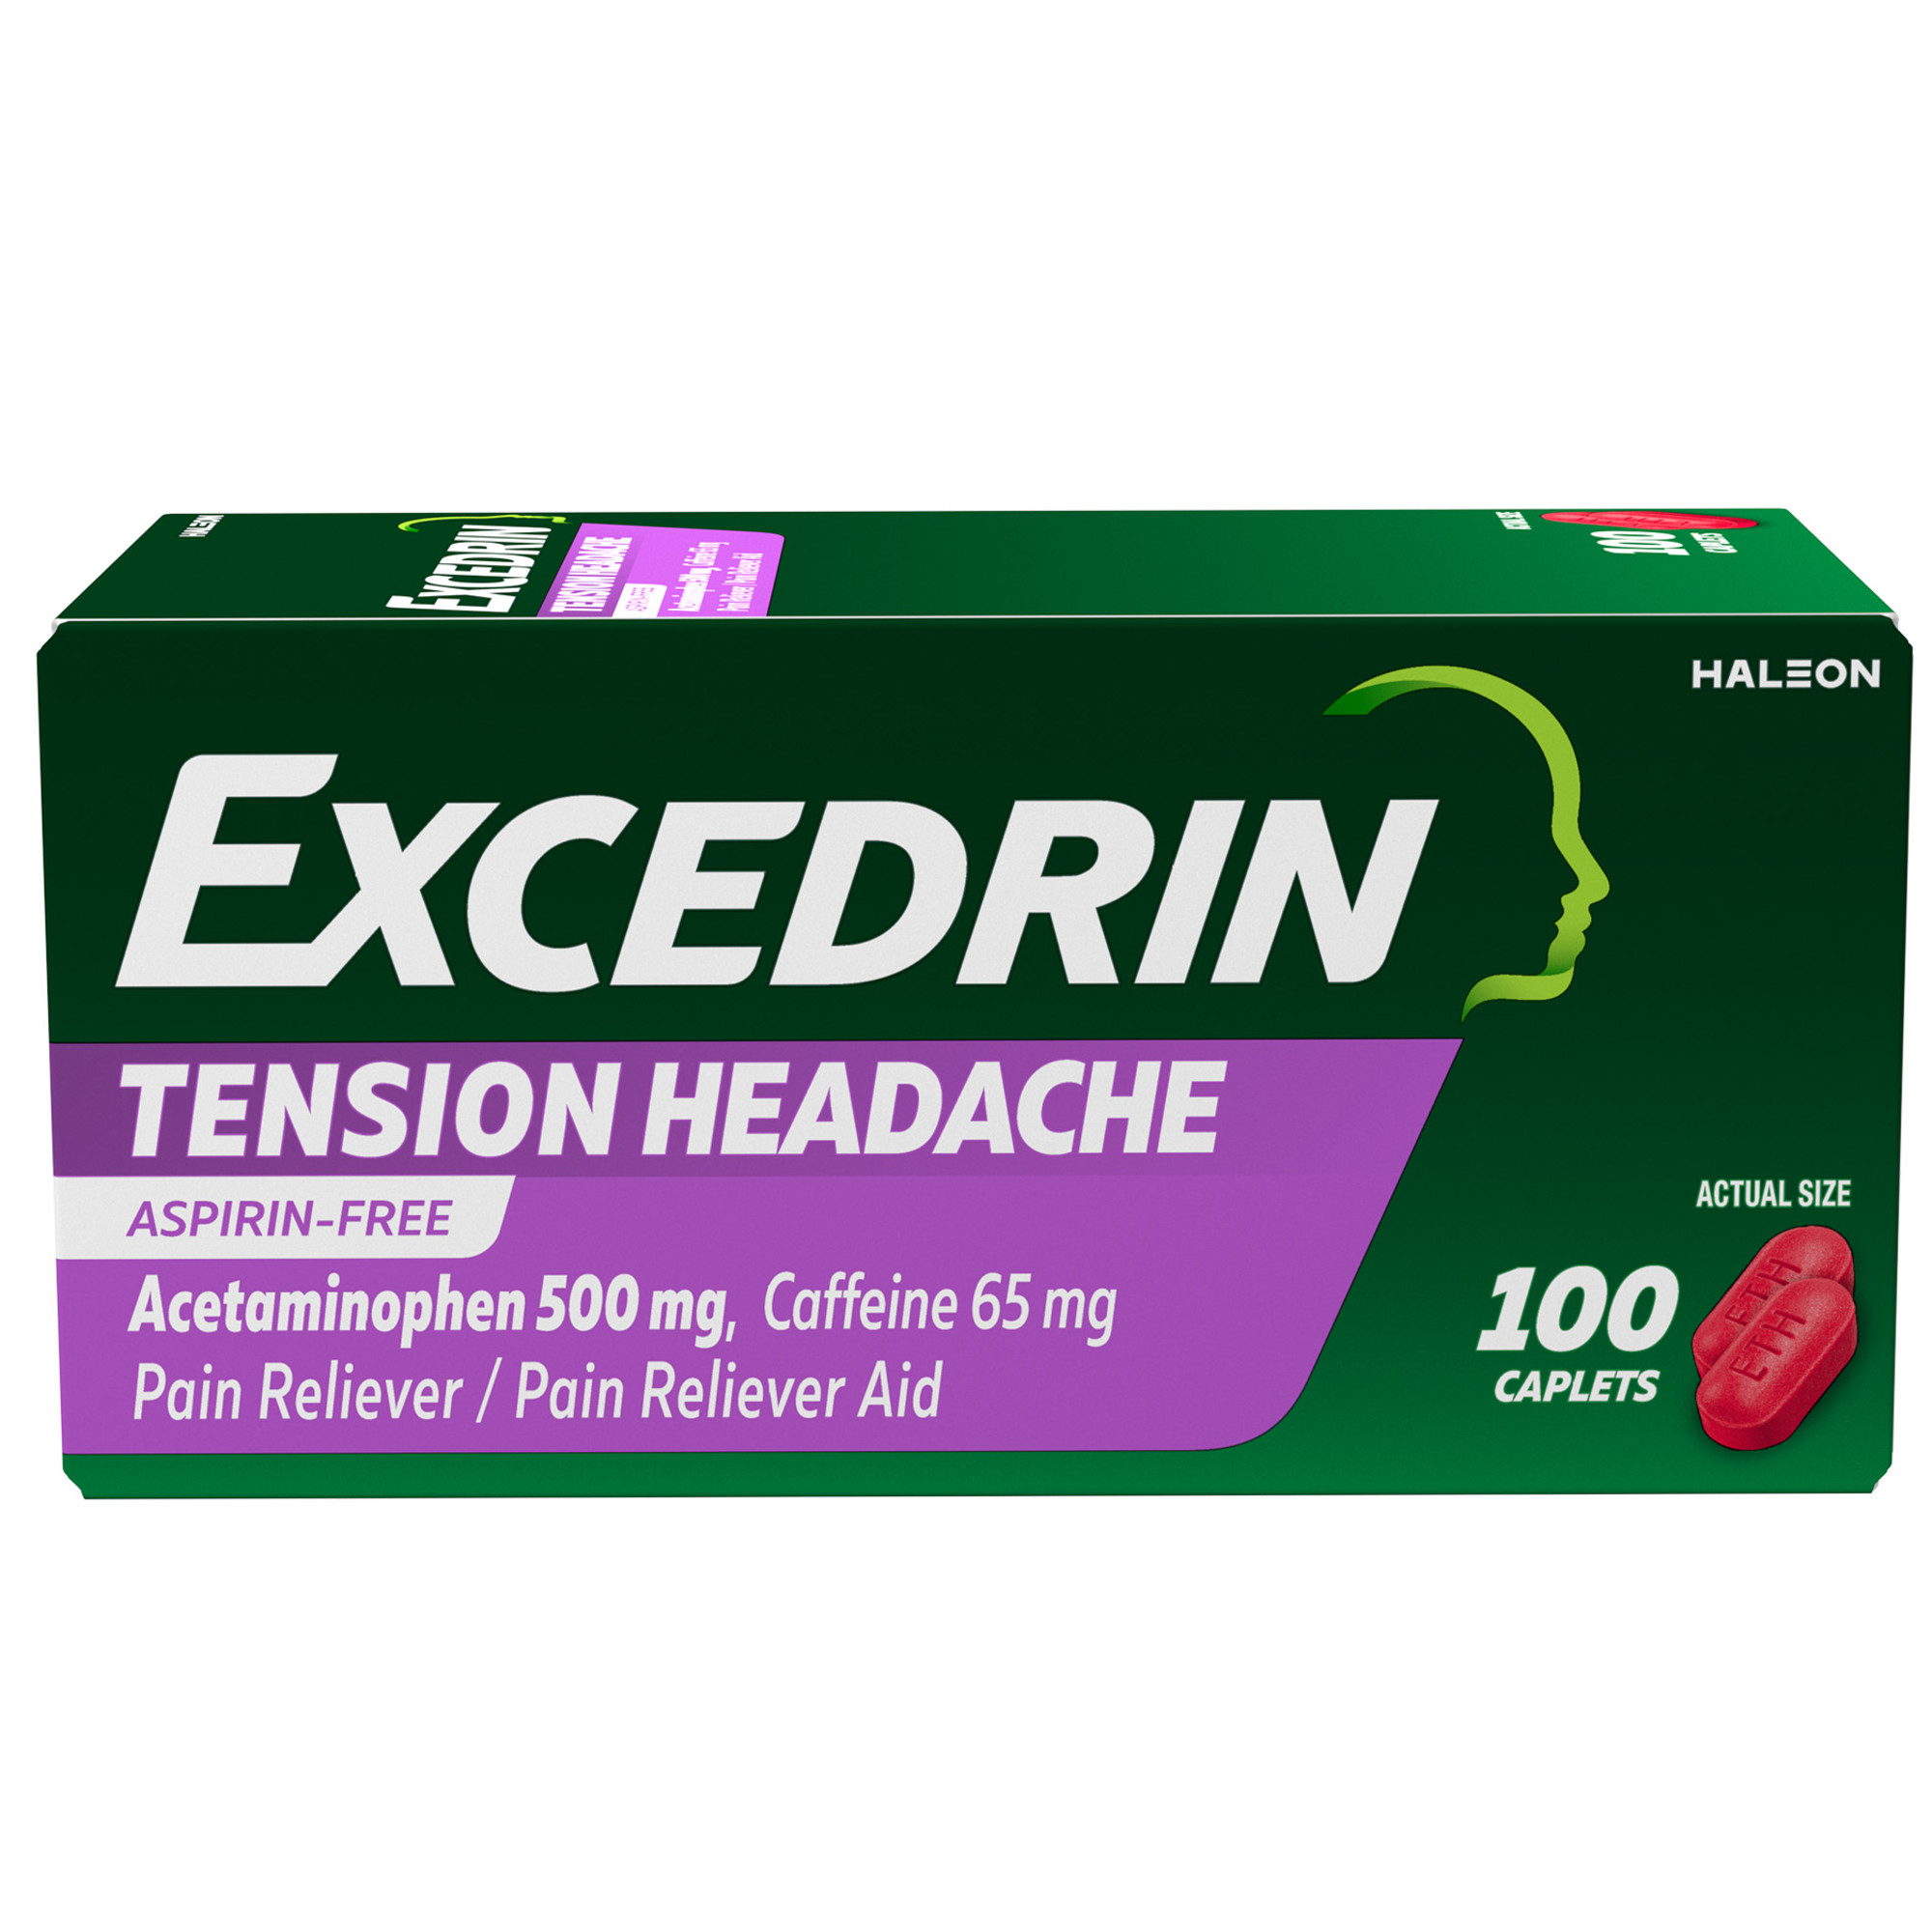 Excedrin Tension Headache Relief Acetaminophen and Caffeine Caplets, 100 Count - image 1 of 10